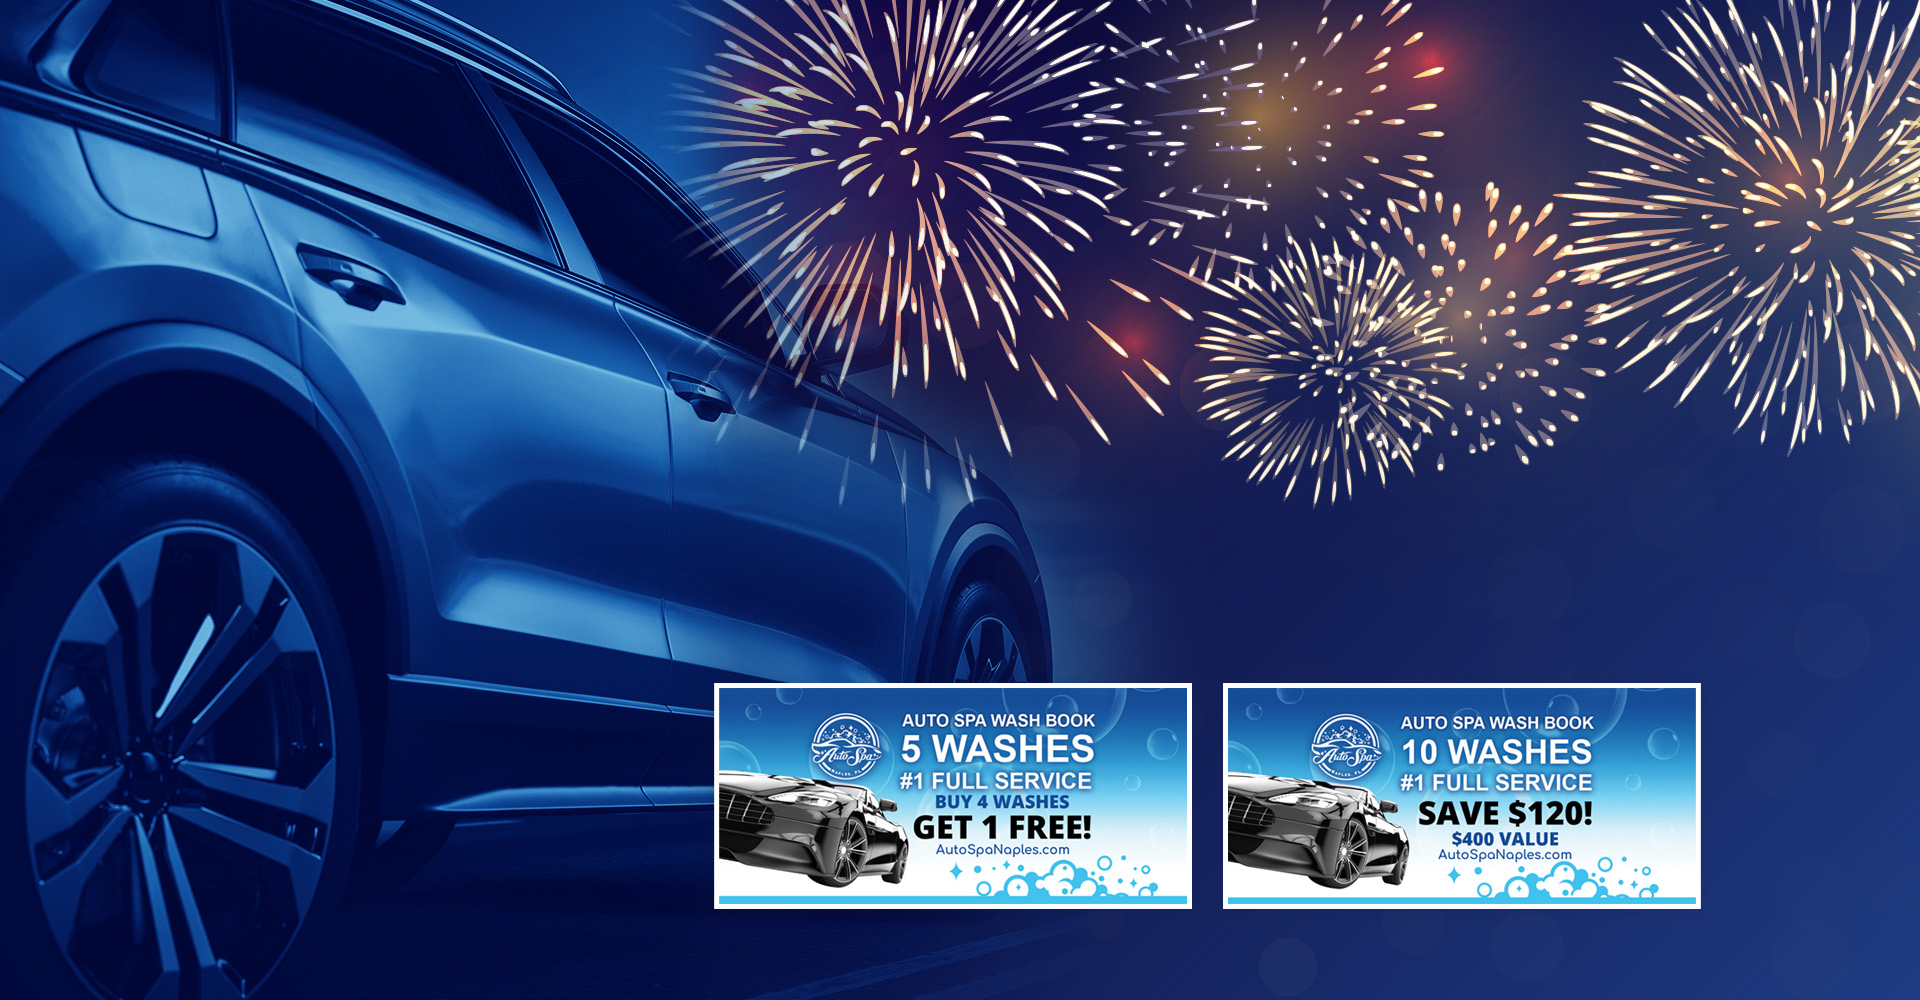 Auto Spa Wash Books shows a car and fireworks with a blue overlay and the Wash Book coupon books.